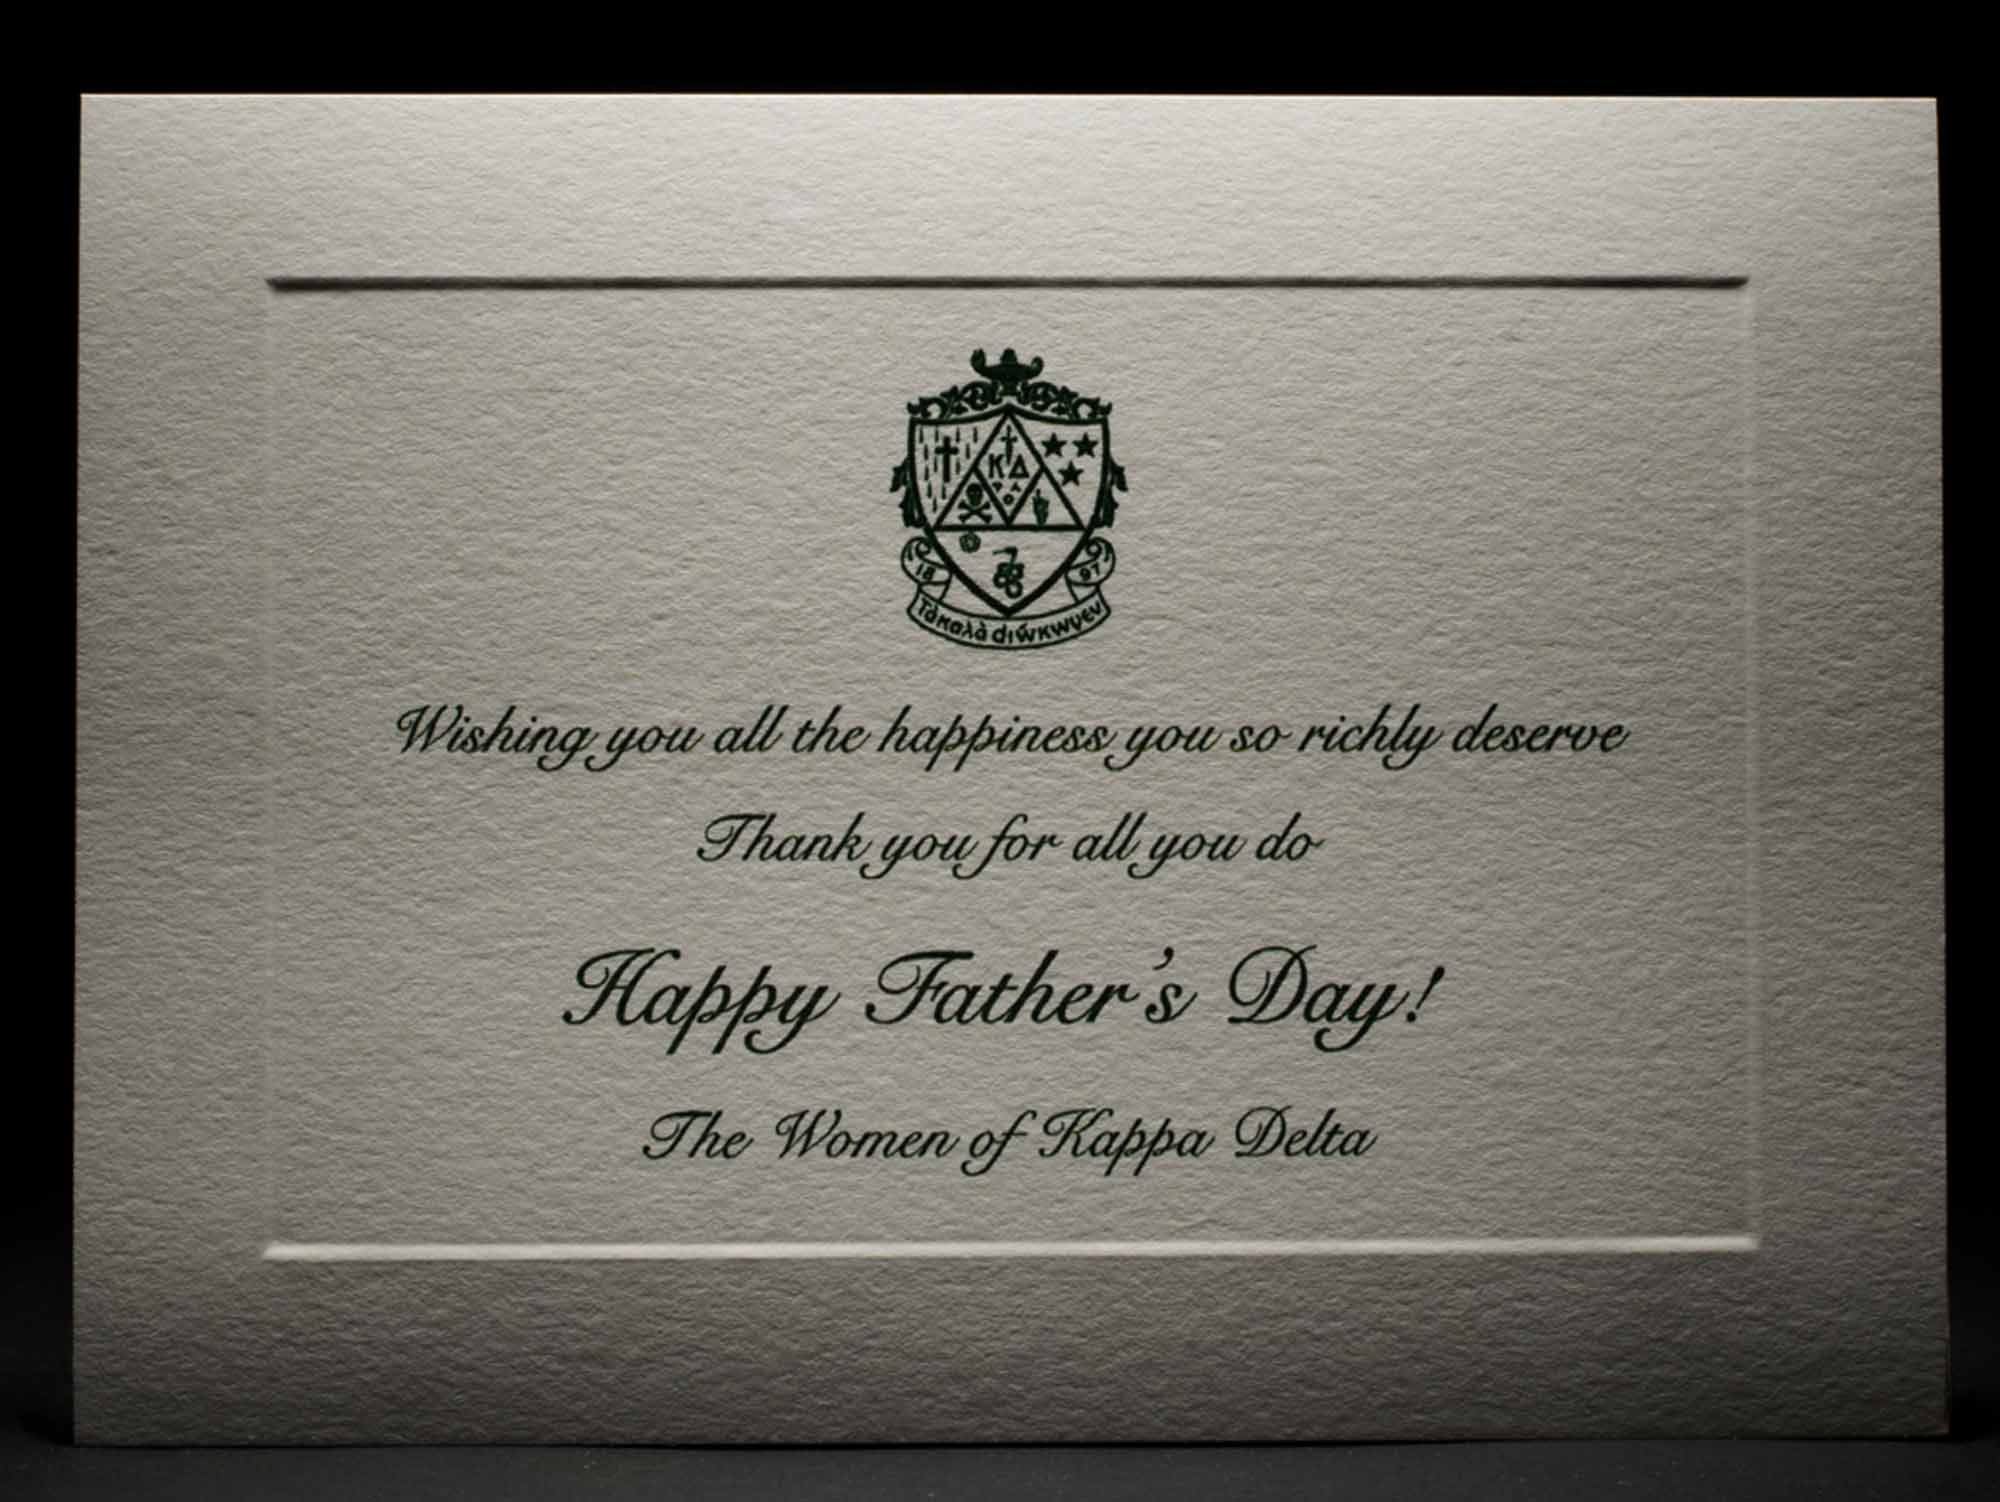 Father's Day Cards Kappa Delta